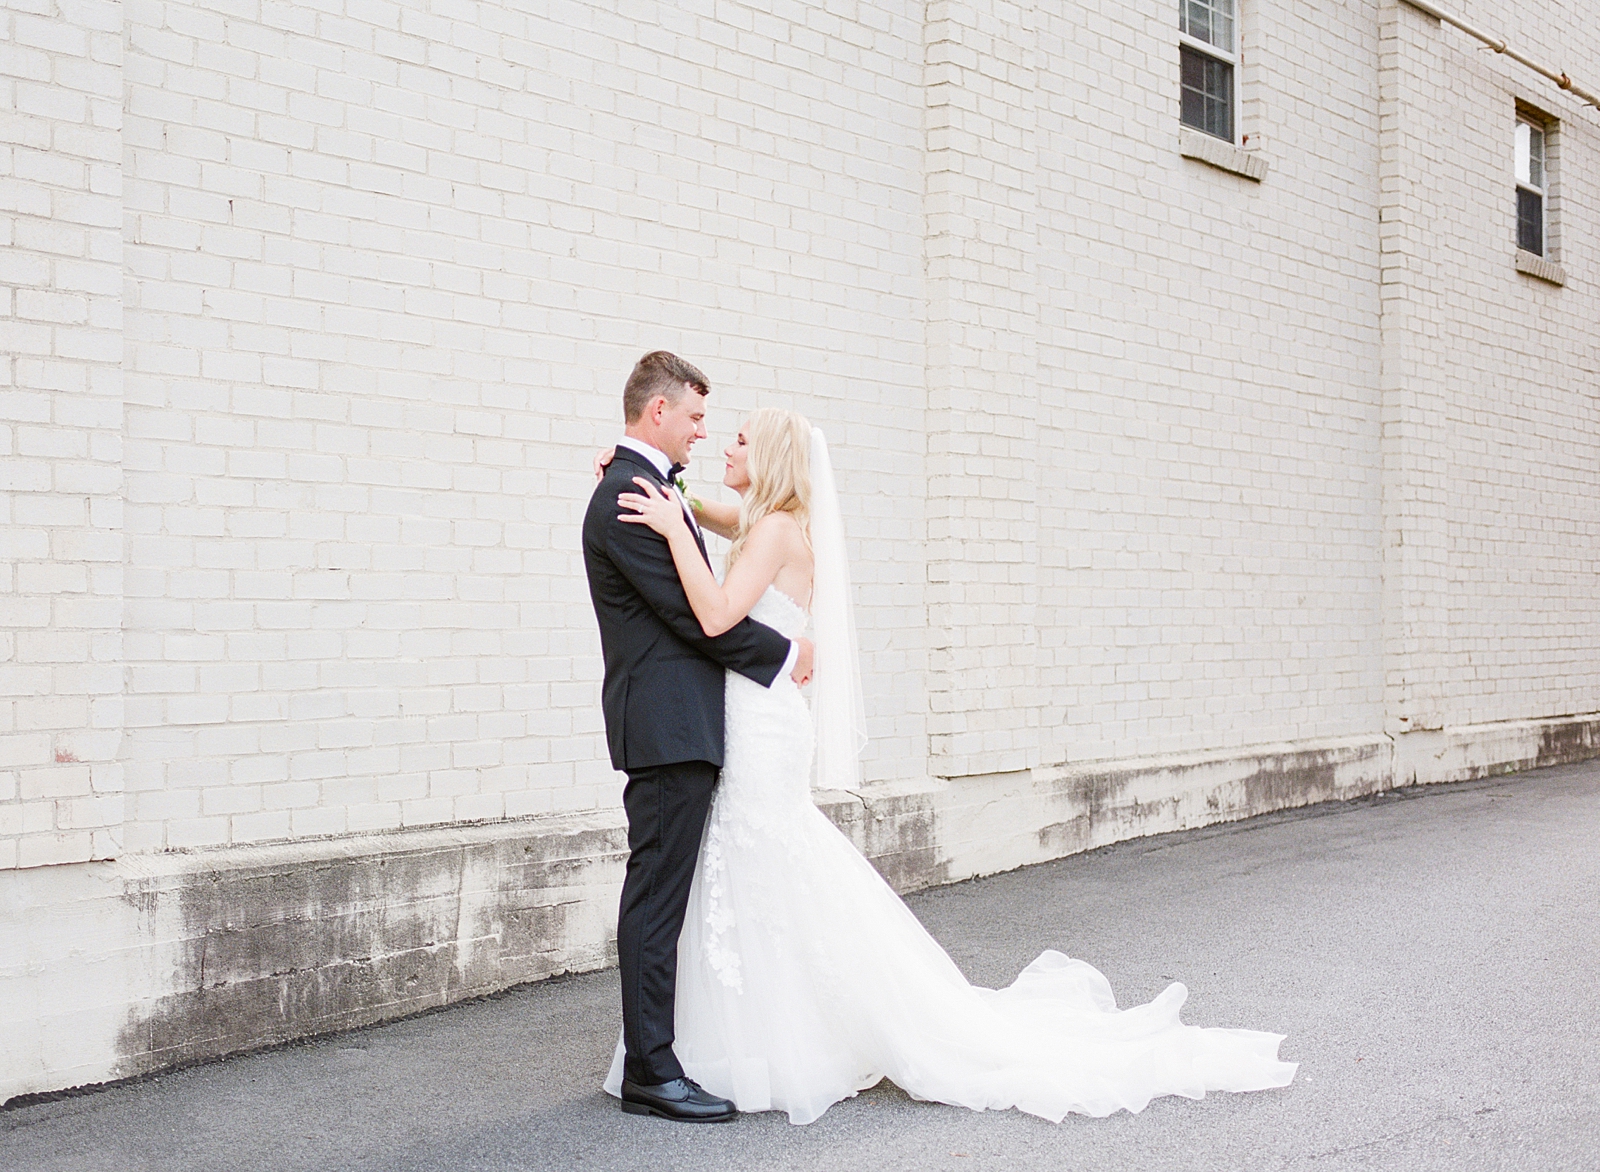 Glover Park Brewery Wedding Bride and Groom Hugging and Smiling Photo